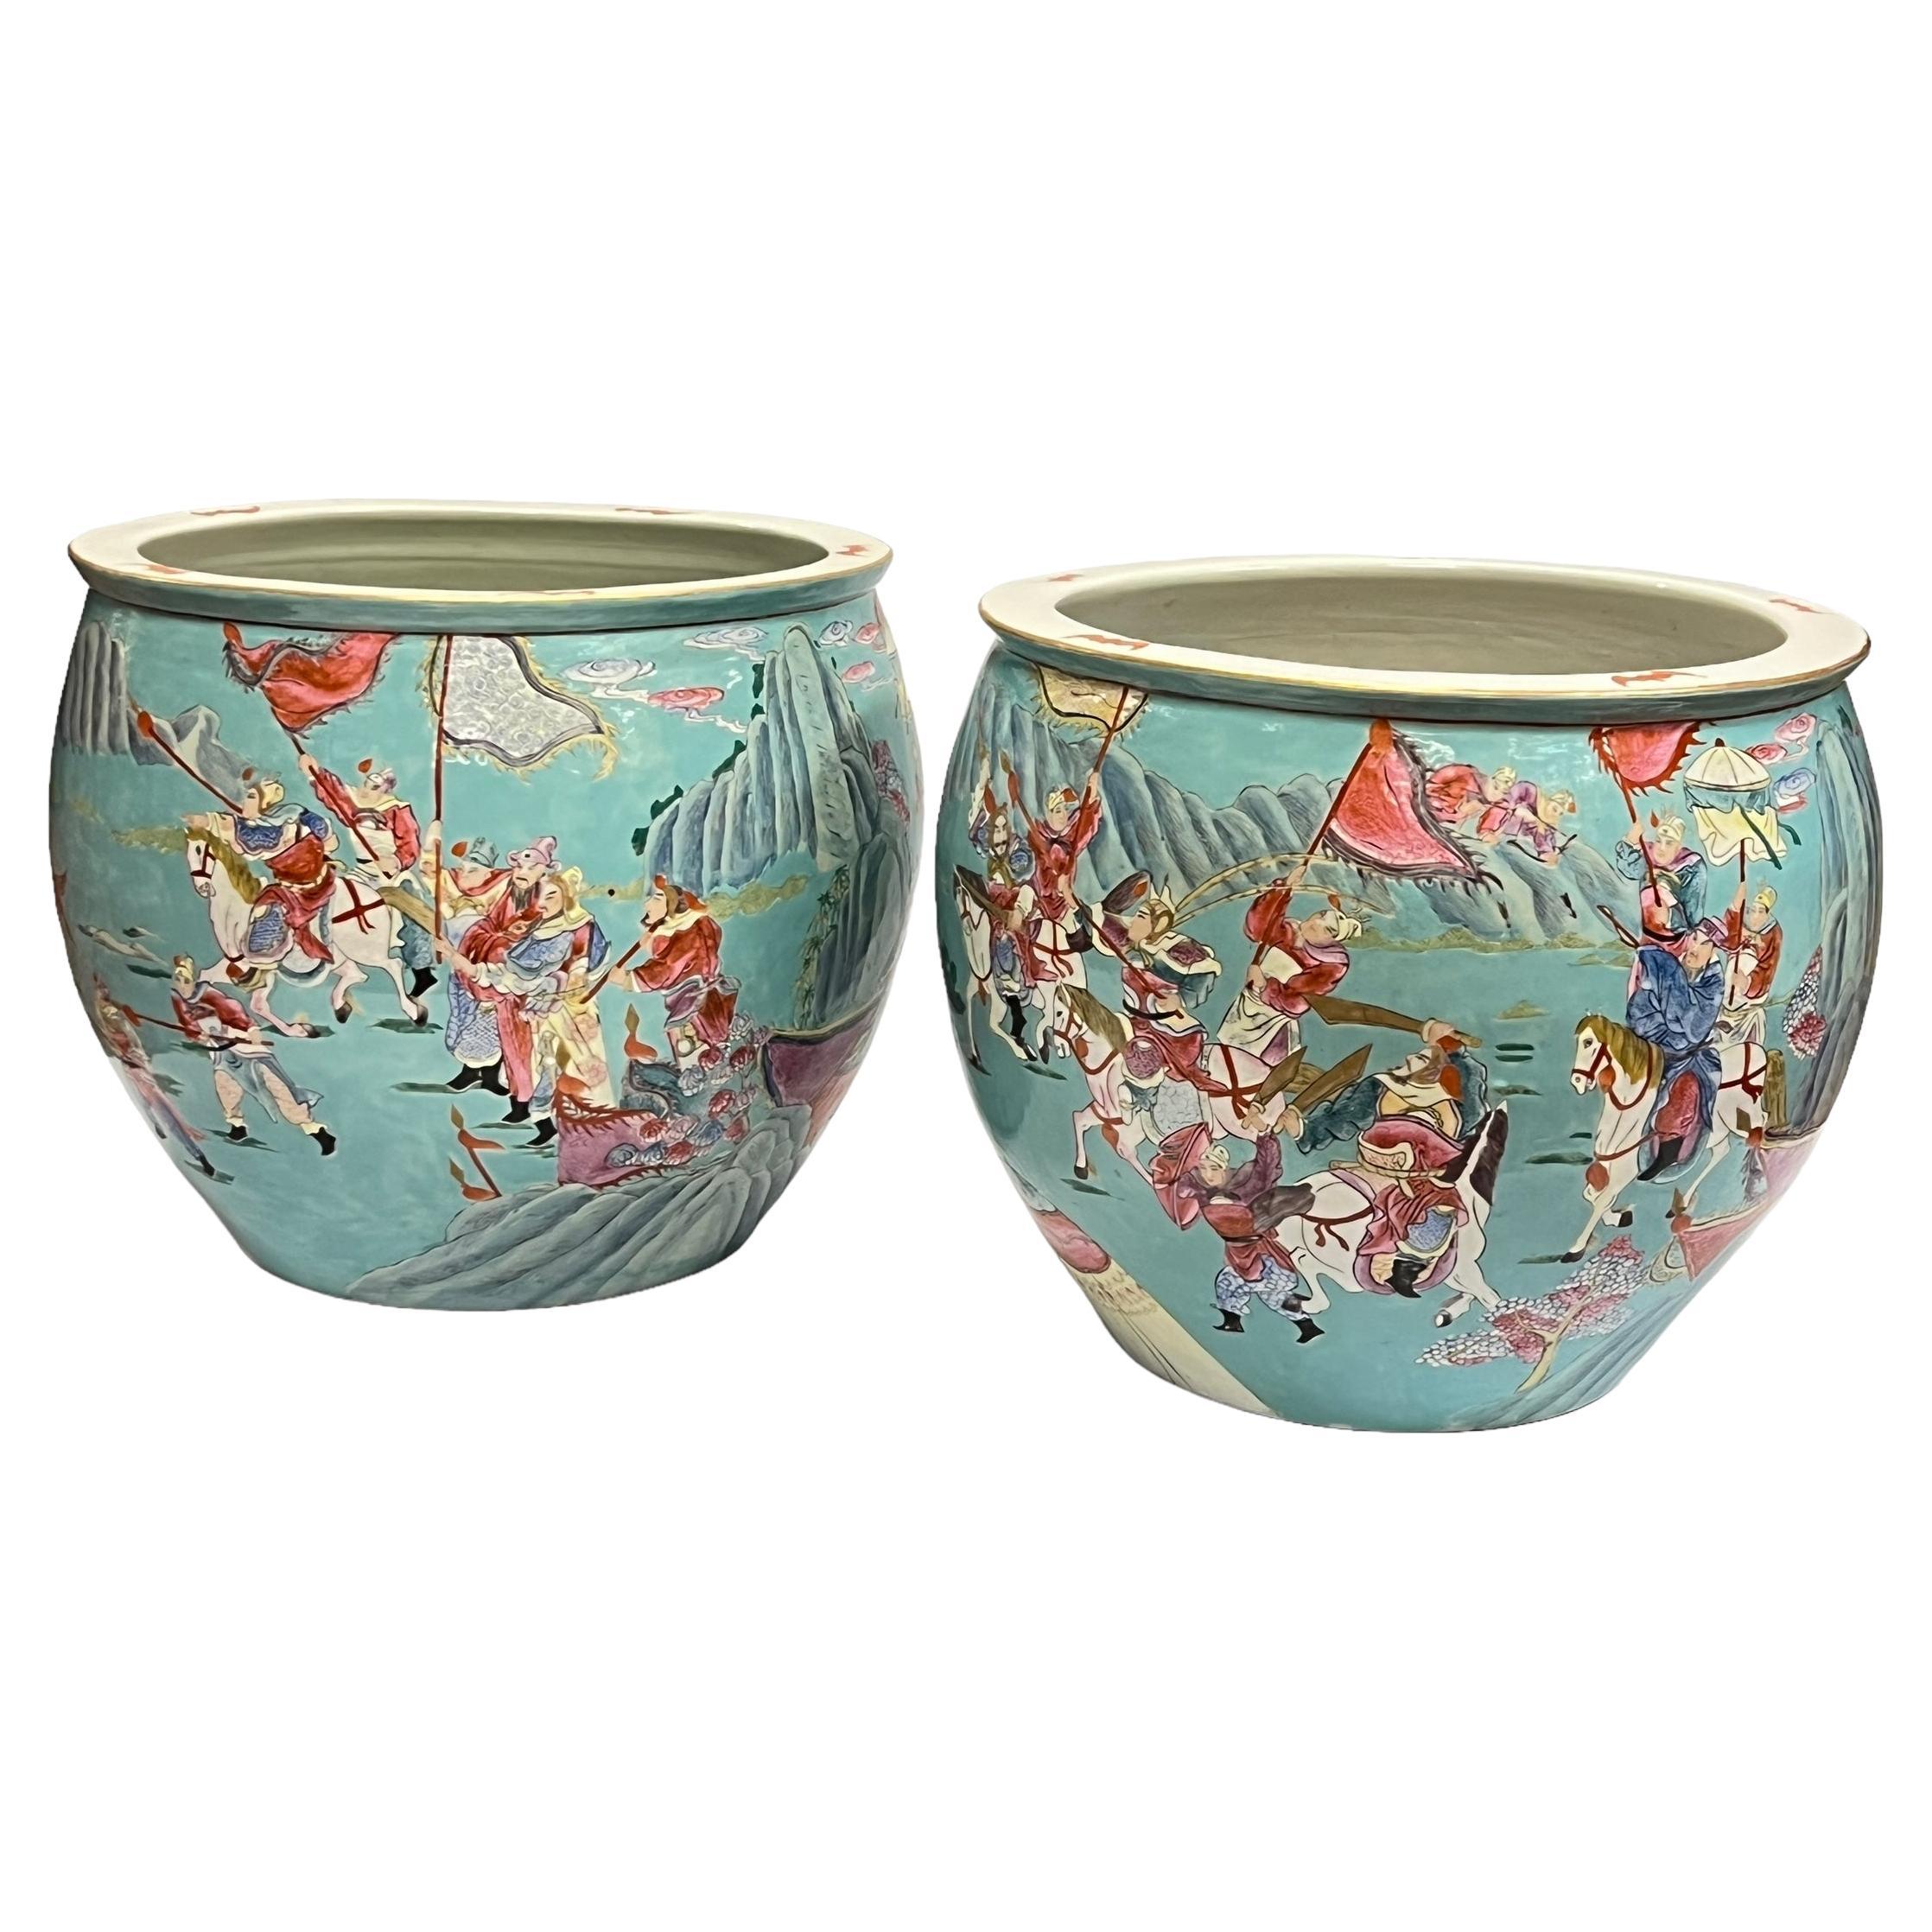 Pair Large Chinese Pale Turquoise Blue Glazed Jardinieres / Planters